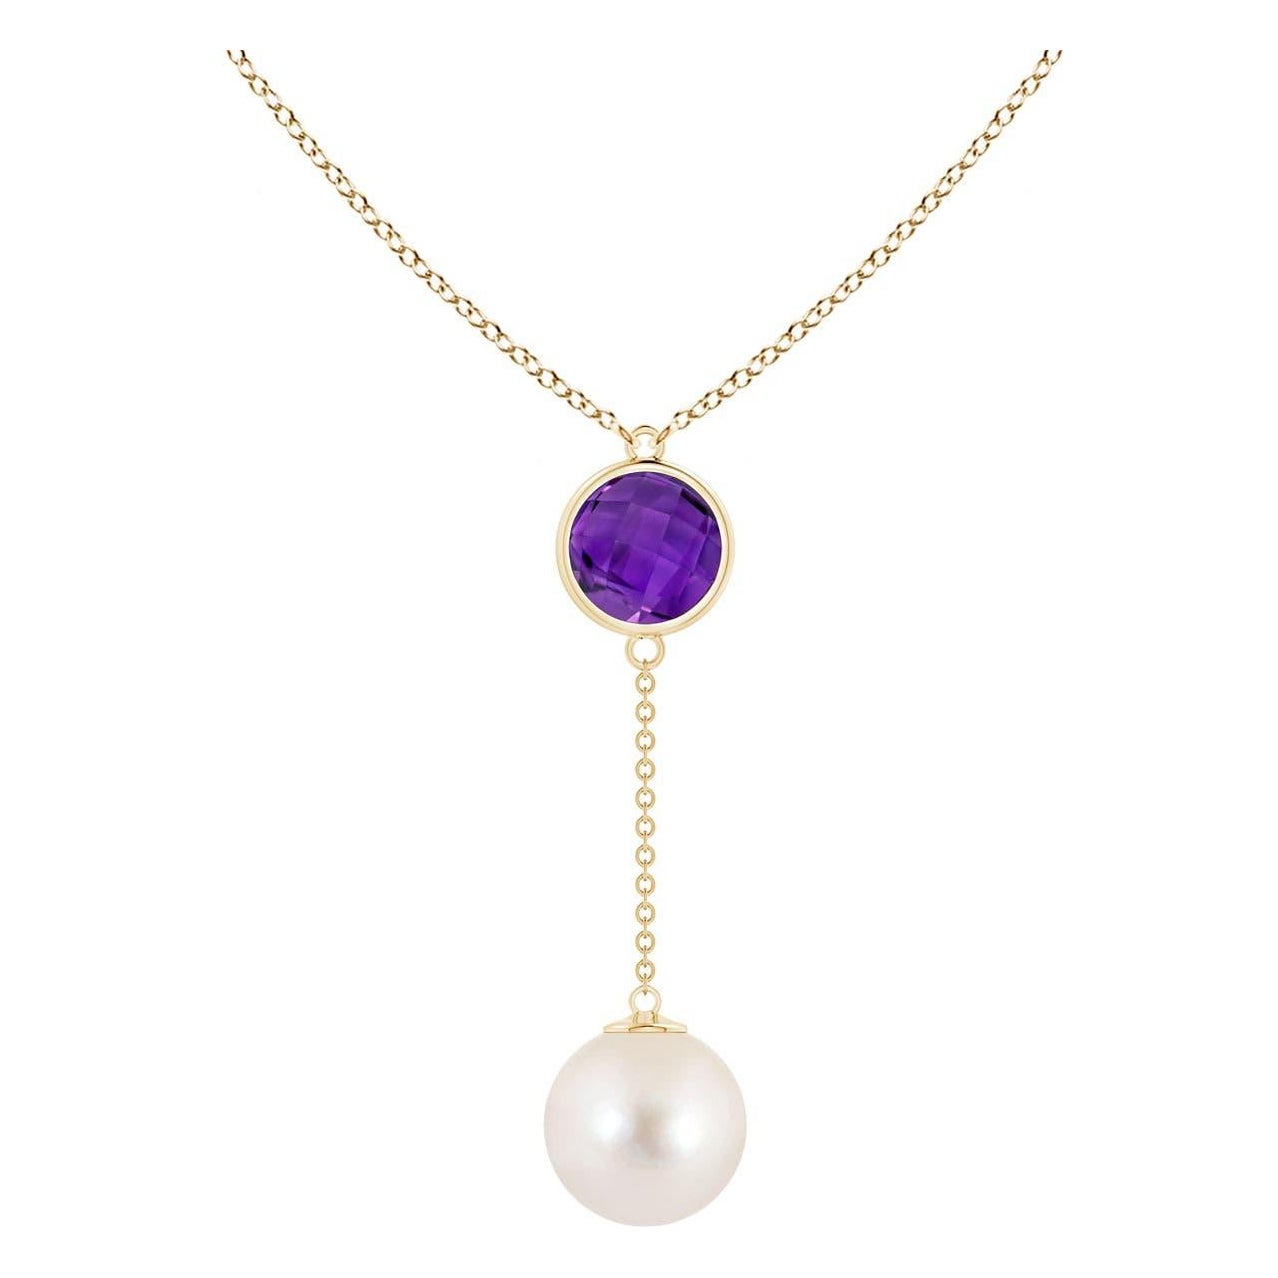 Freshwater Cultured Pearl & 1.65ct Amethyst Lariat Necklace in 14K Yellow Gold For Sale